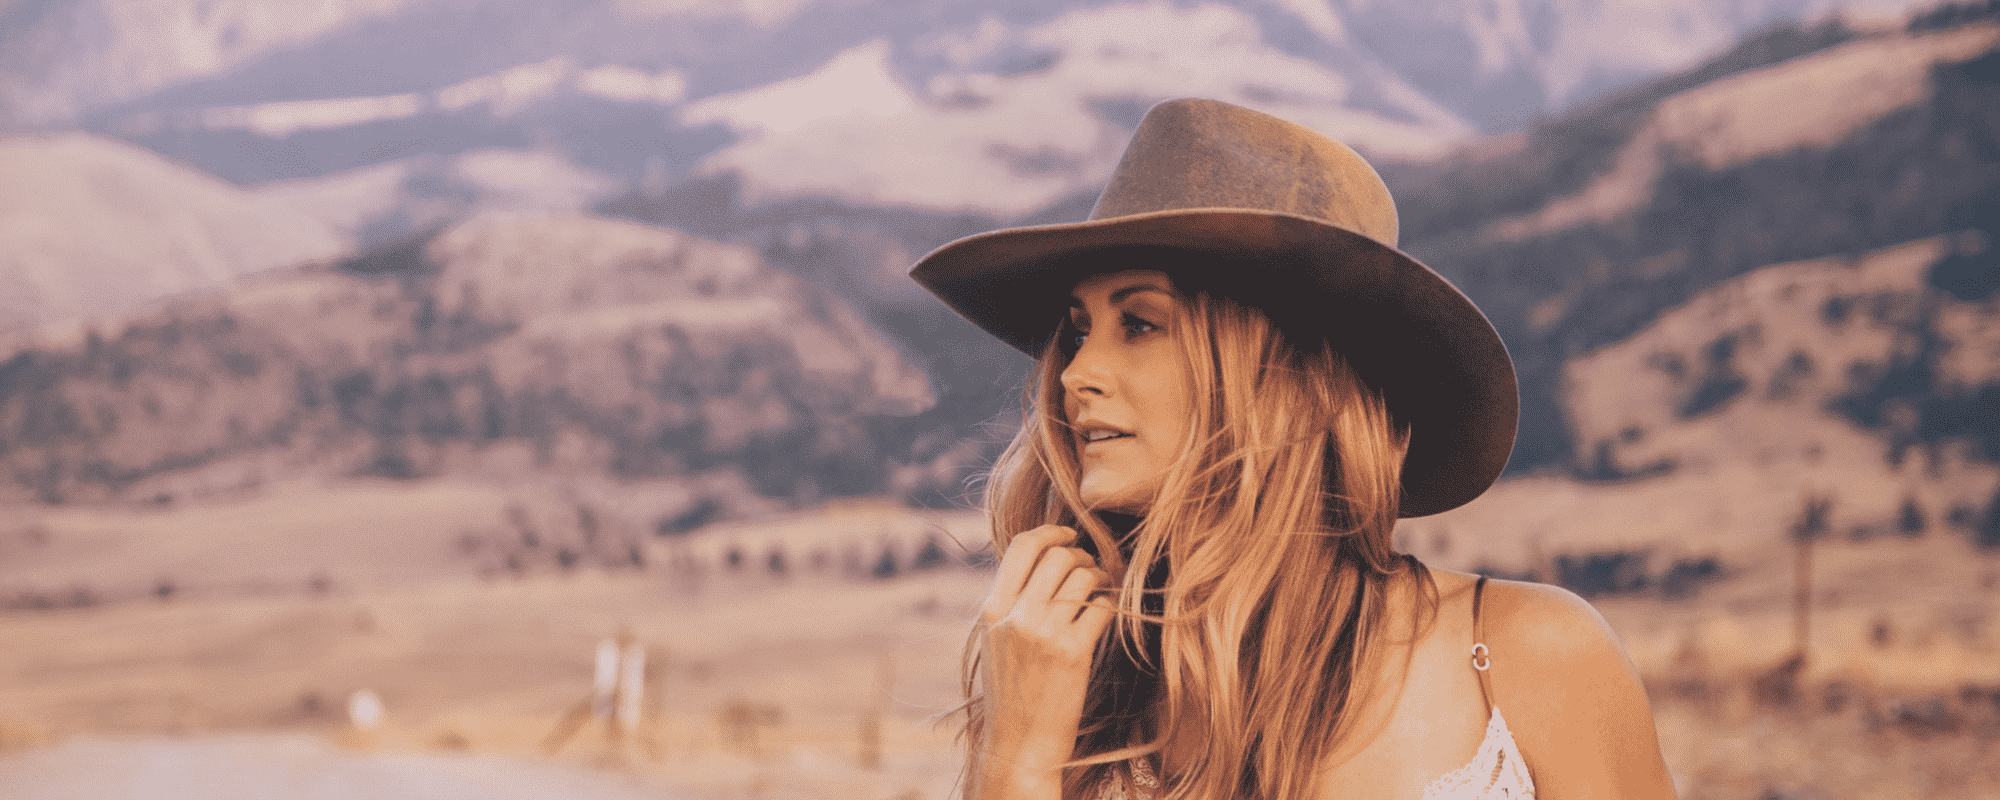 Cowboy Boots & Love Songs: Stephanie Quayle’s Self-Titled Album is a Force of Nature